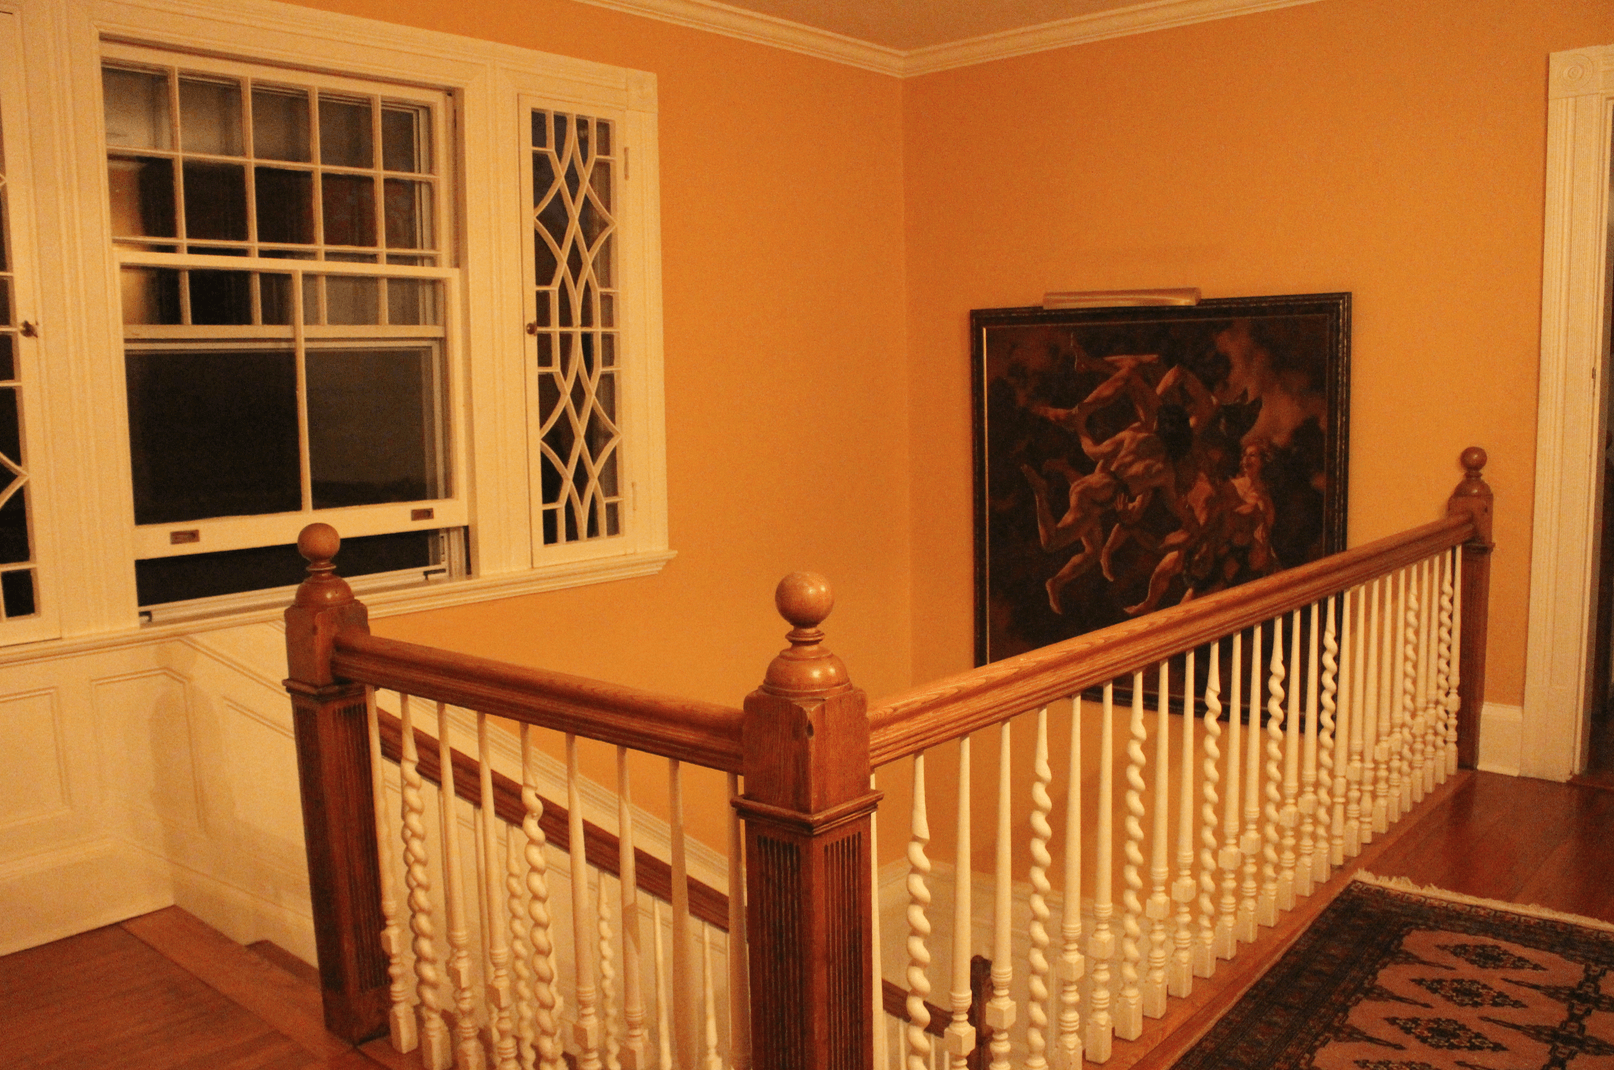 Beautifully crafted woodwork from the foyer to the second and third floor landings.